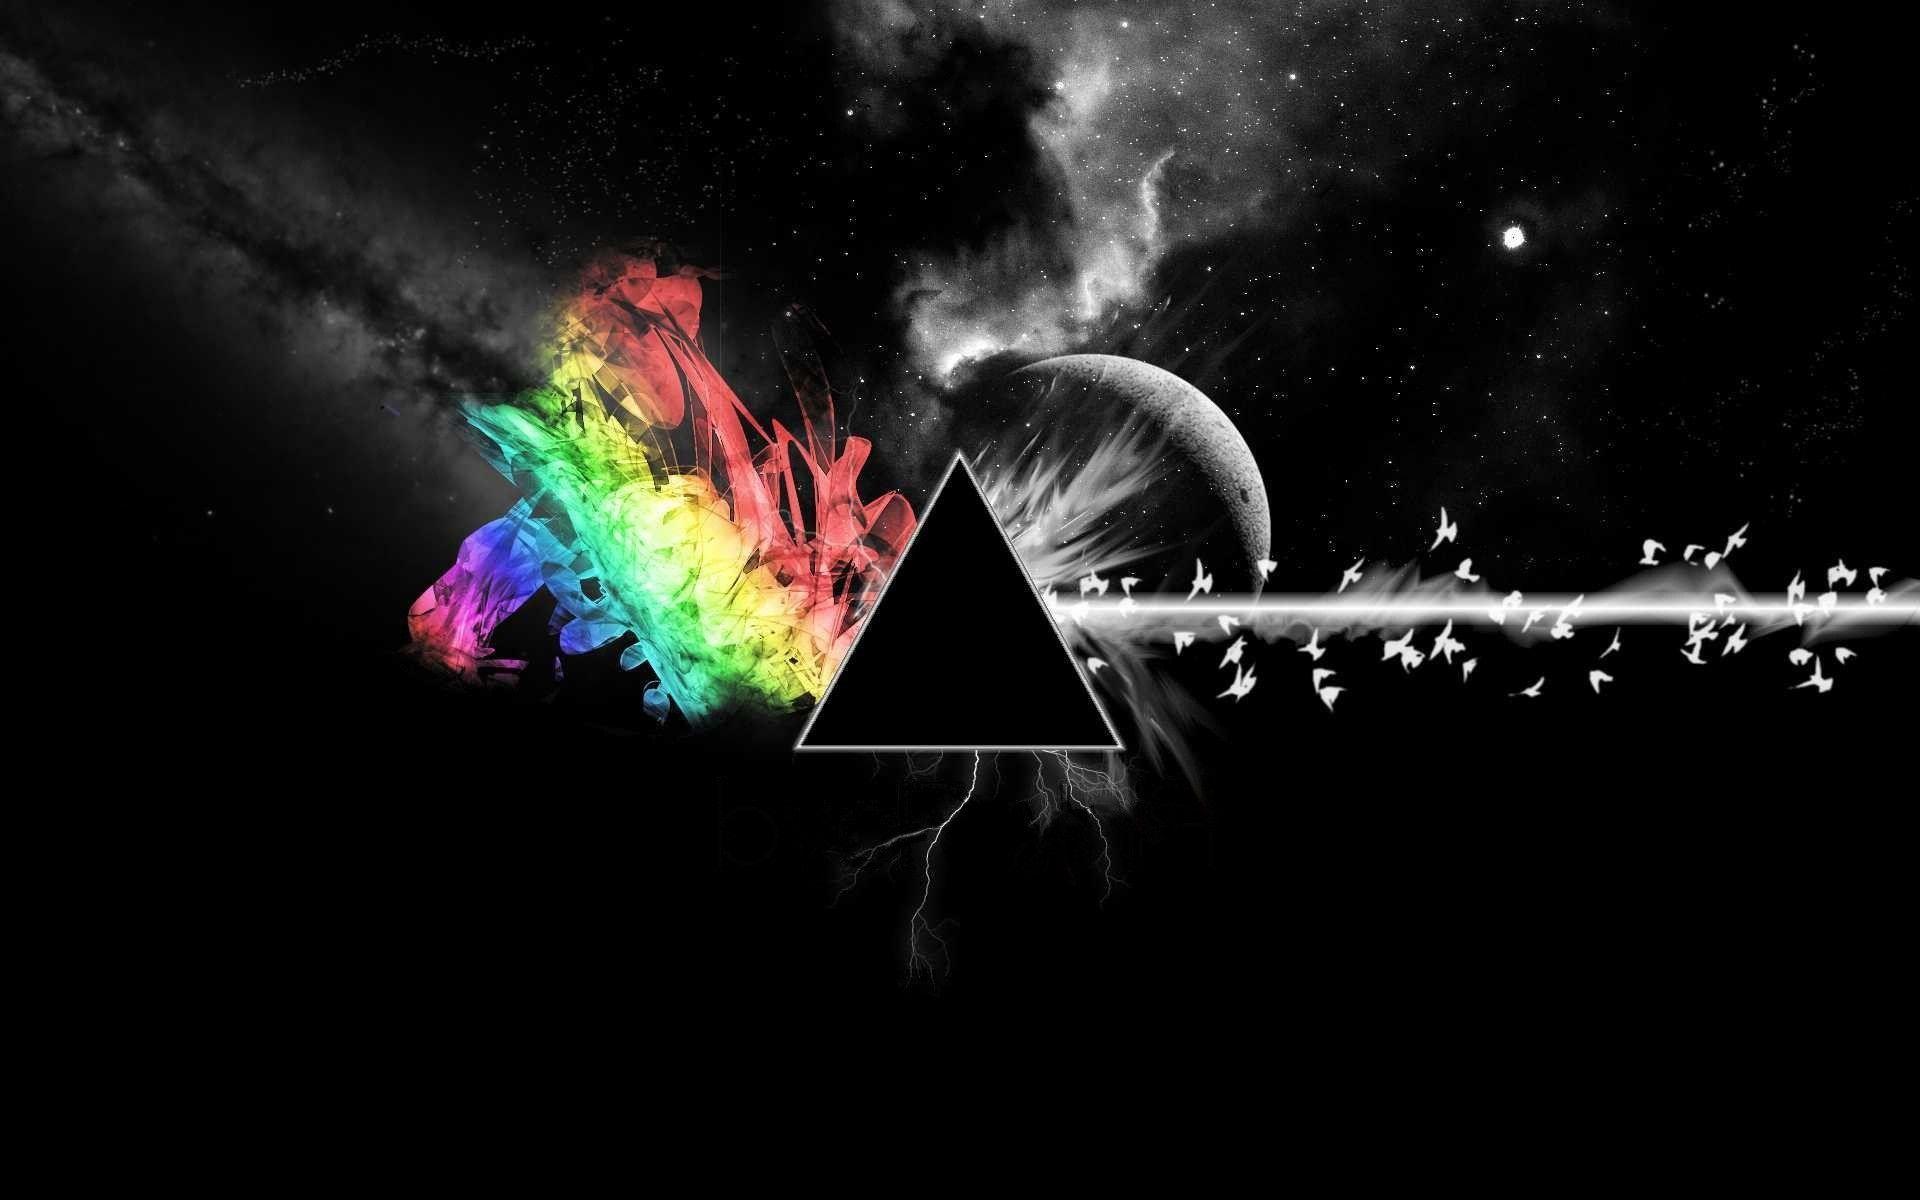 Gallery of 46 Prism Background, Wallpaper